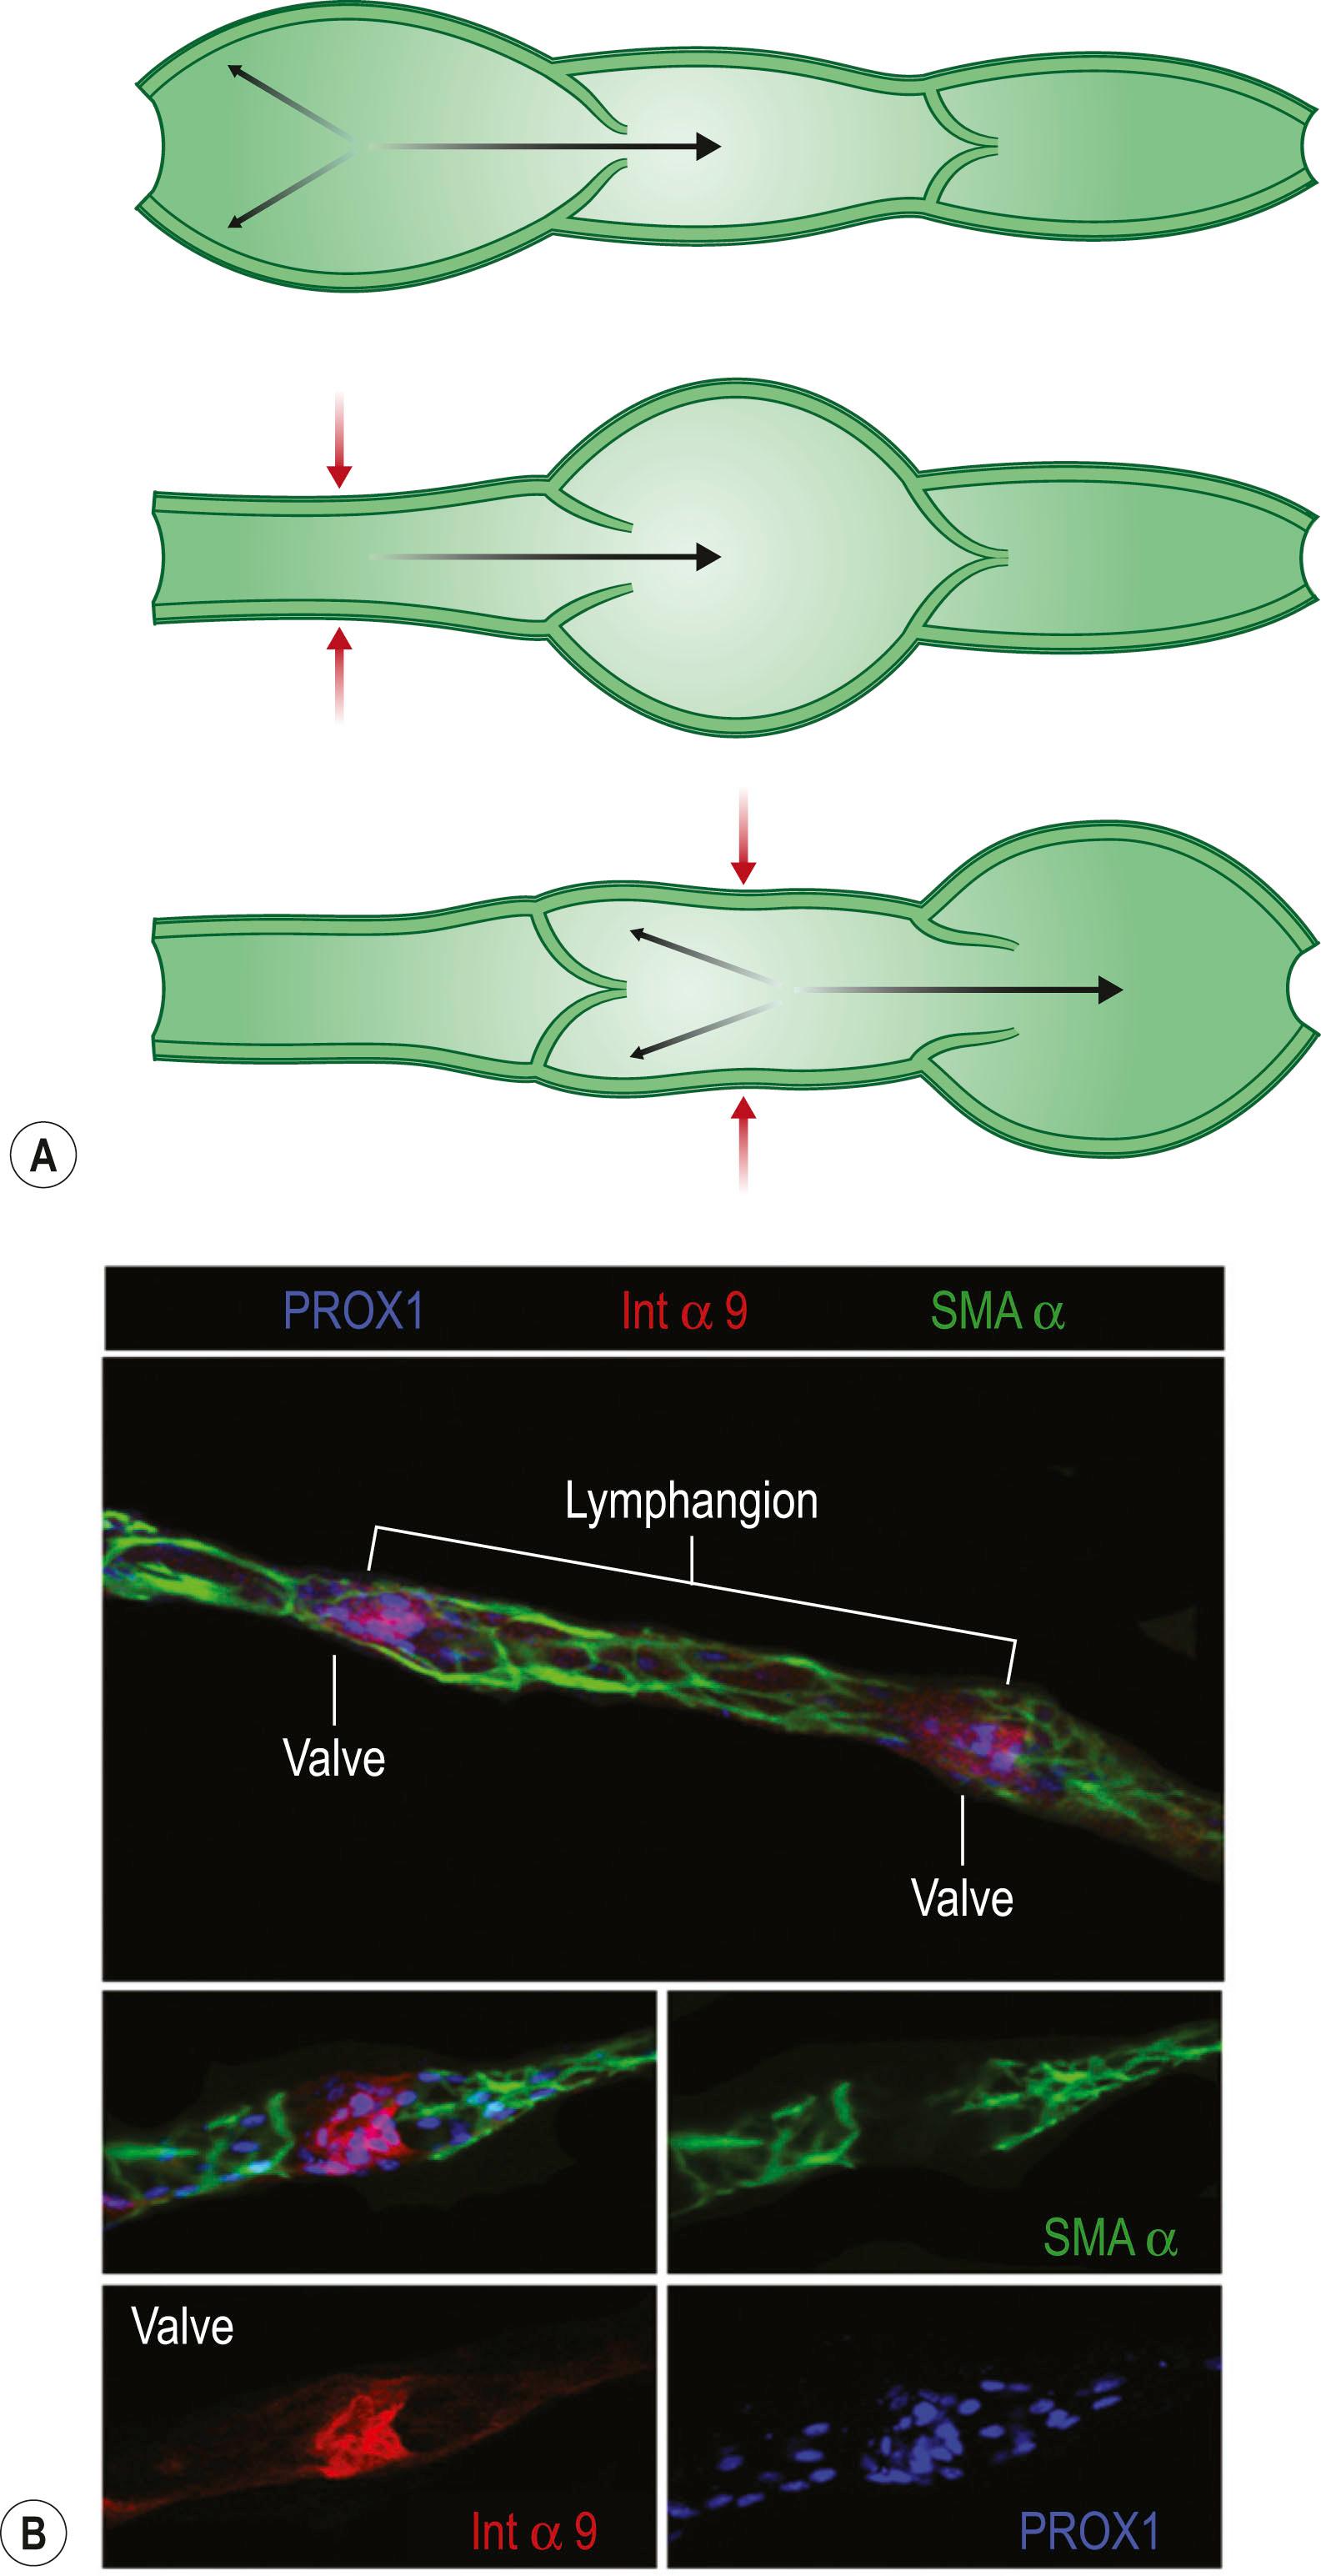 Figure 28.3, Anatomy of a lymphangion. (A) Schematic representation of a lymphangion (segment of lymphatic collector between two valves). (B) Fluorescent immune-histological representation of a lymphangion (segment of lymphatic collector between two valves) in mouse ear skin (upper). Note the two valves immune-positive for integrin alpha 9 (a valve marker). High magnification image of a single valve showing SMA cells (green), valve leaflets (red), and PROX1-stained LECs (blue).